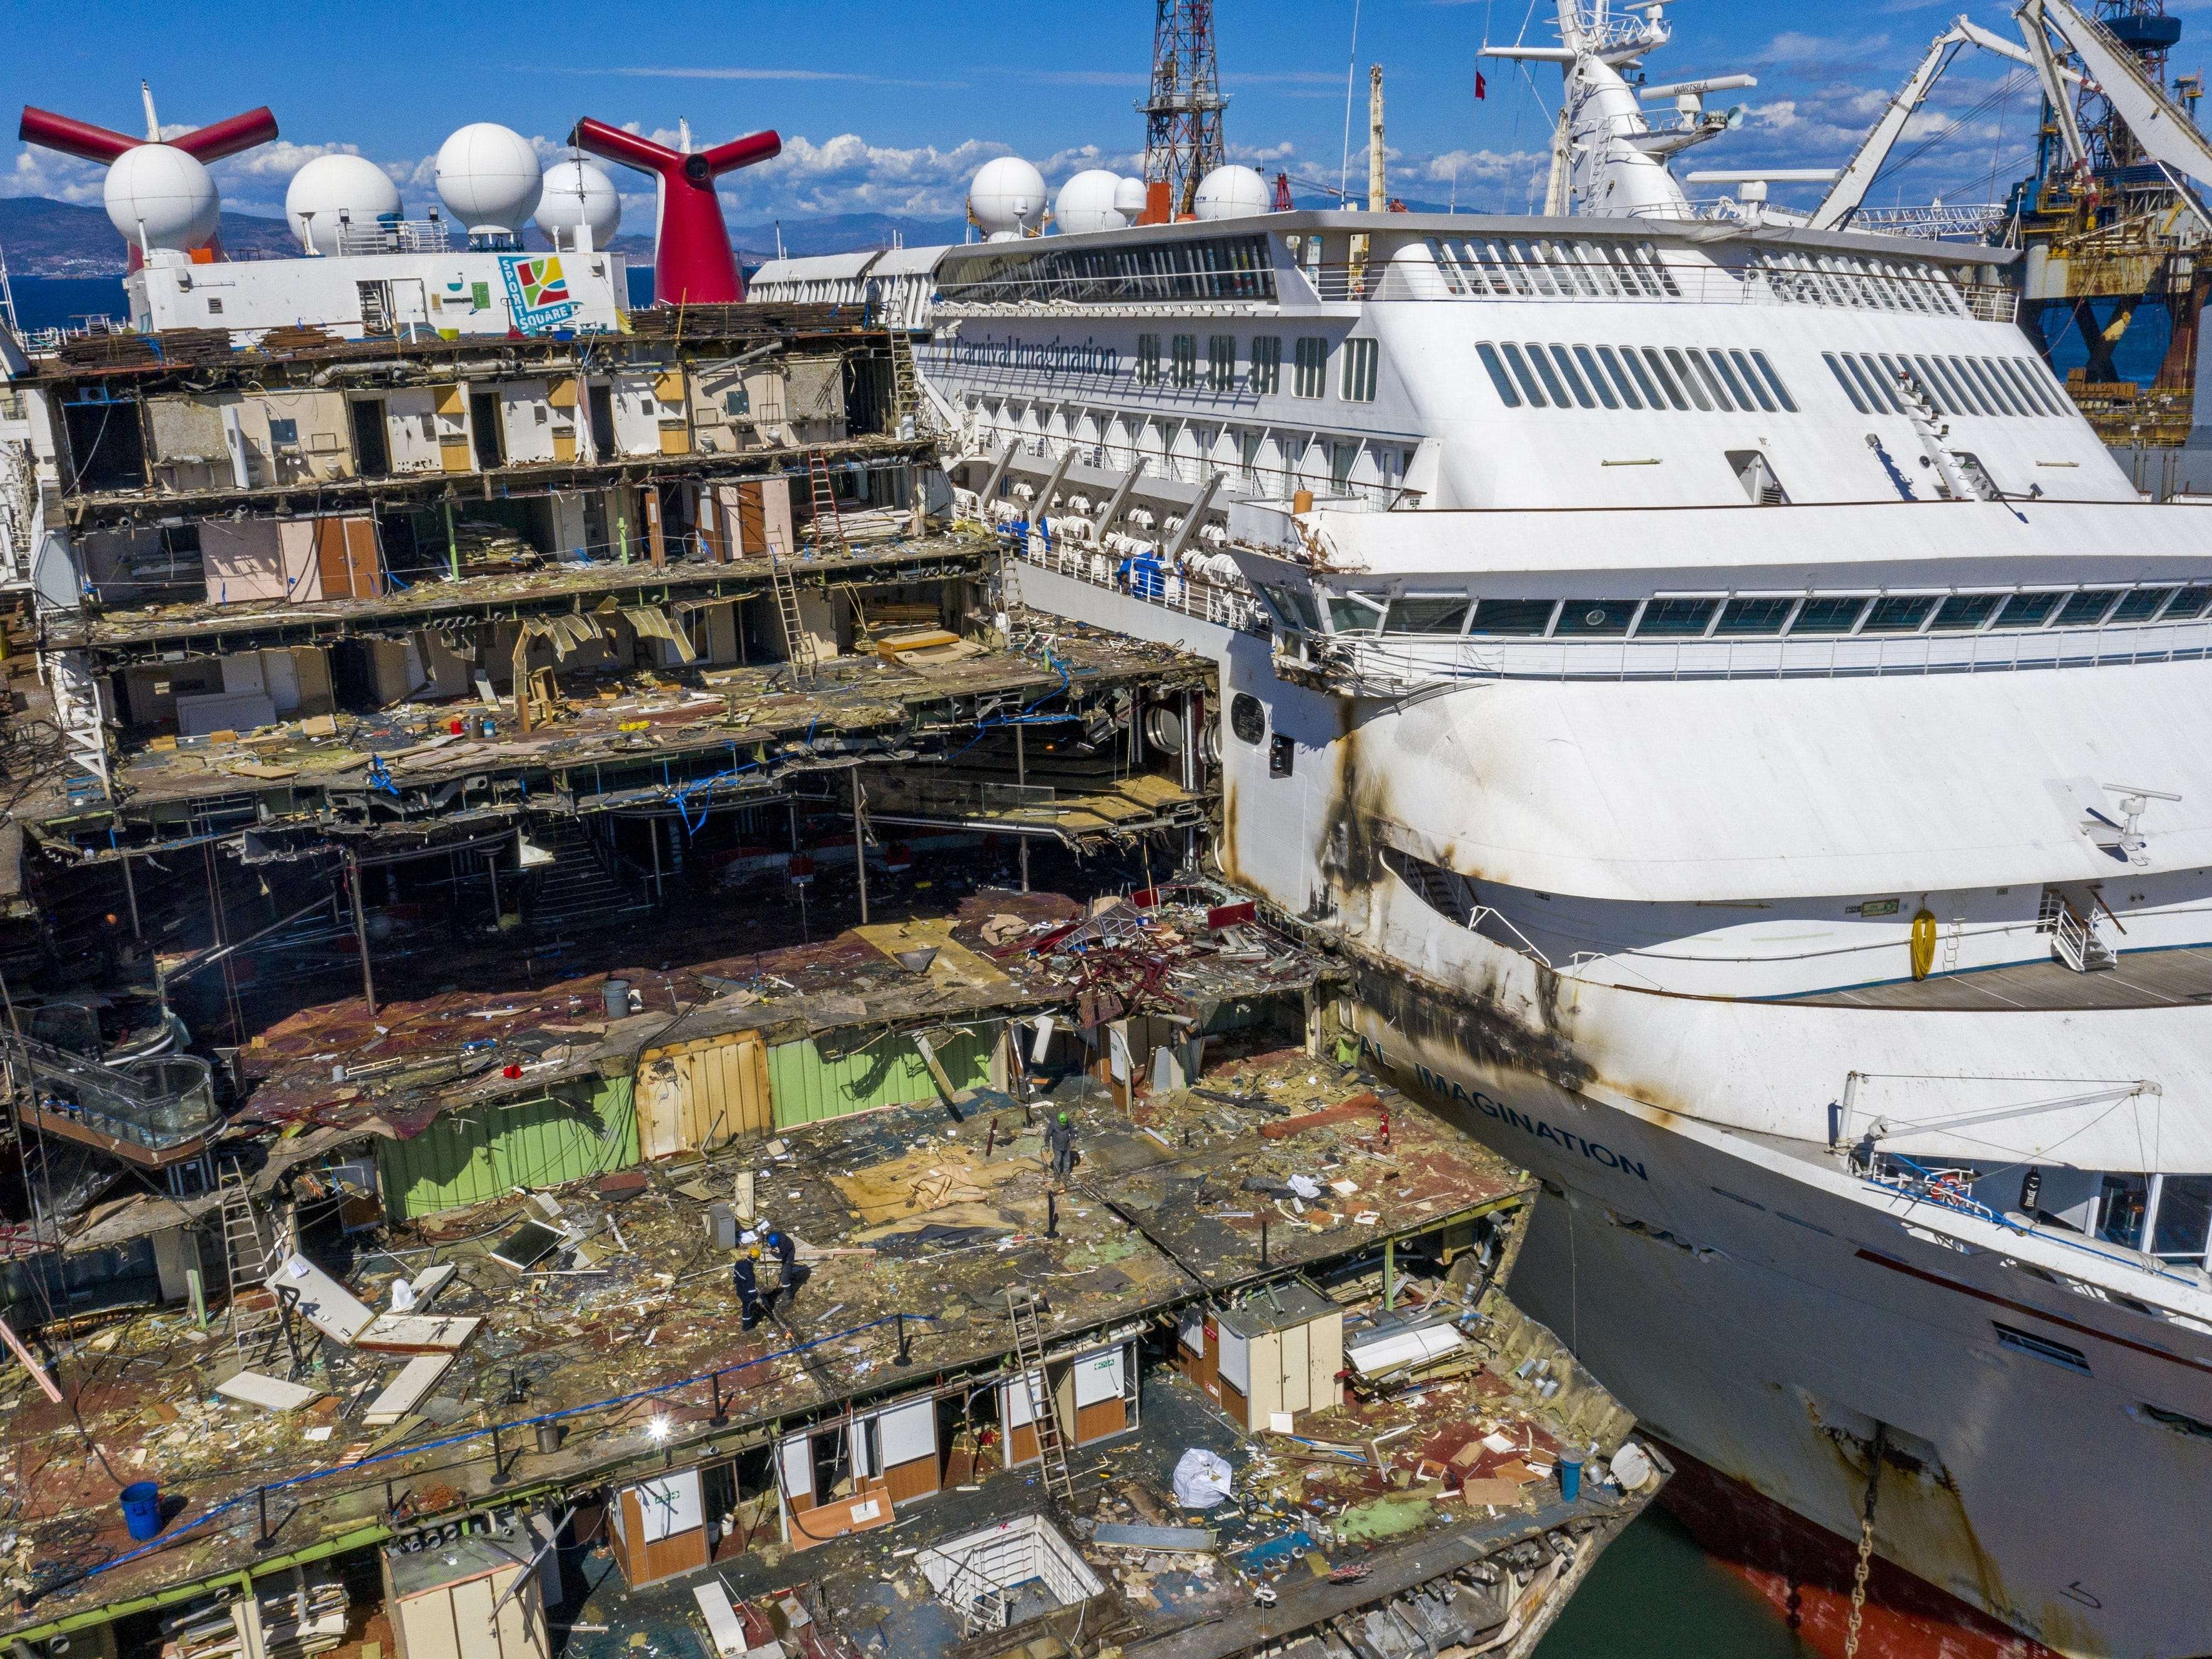 Photos of abandoned, stripped cruise ships show how deeply the cruise